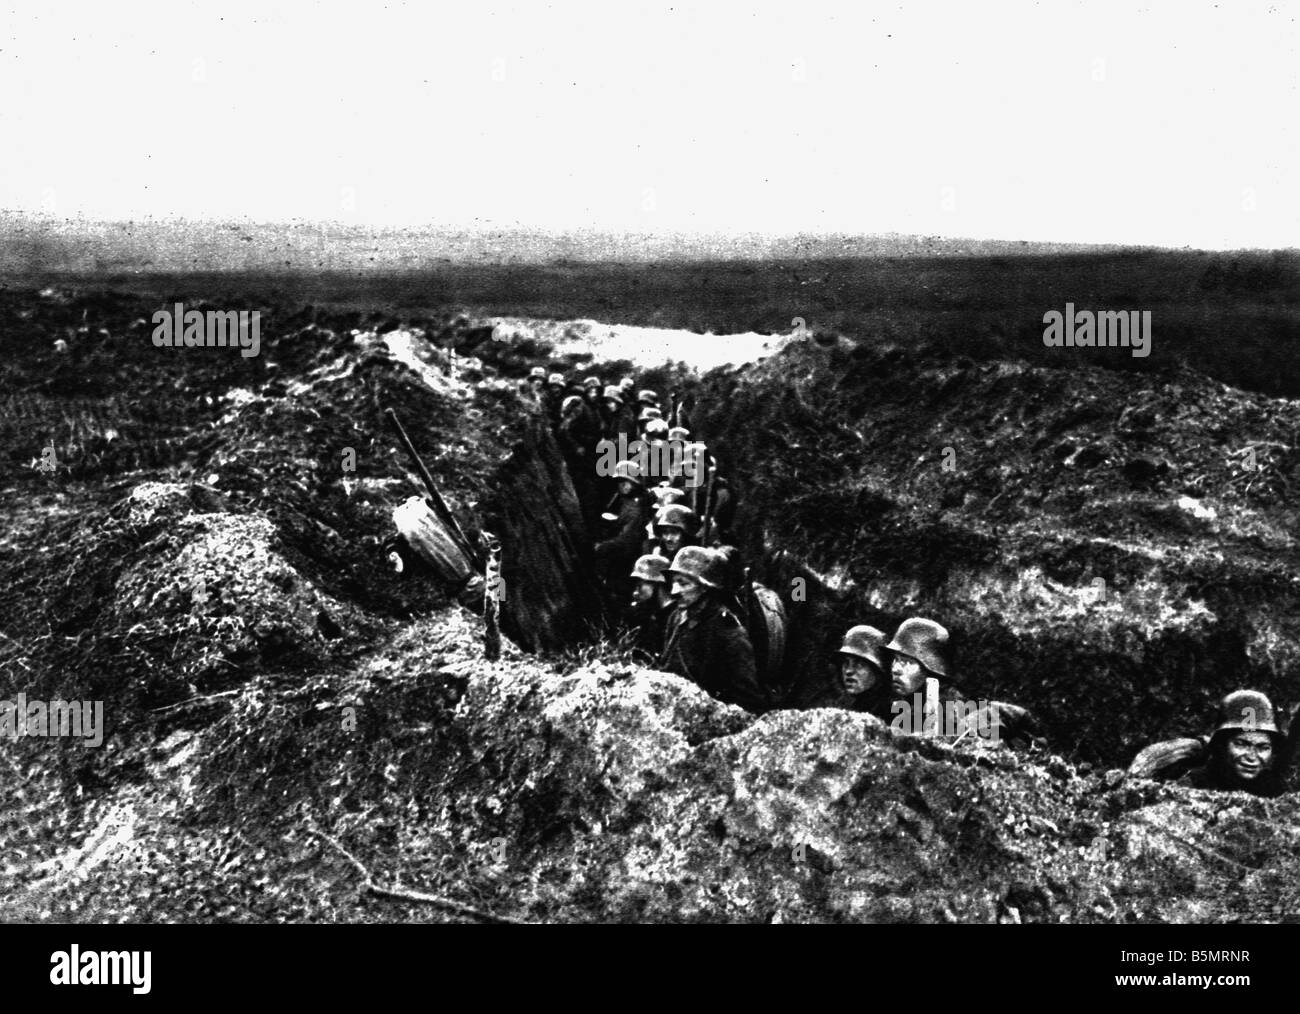 9 1918 5 31 A2 WW1 Battle of Marne 1918 Ger infantry World War 1 Western Front German major offensive March July 1918 Offence of Stock Photo